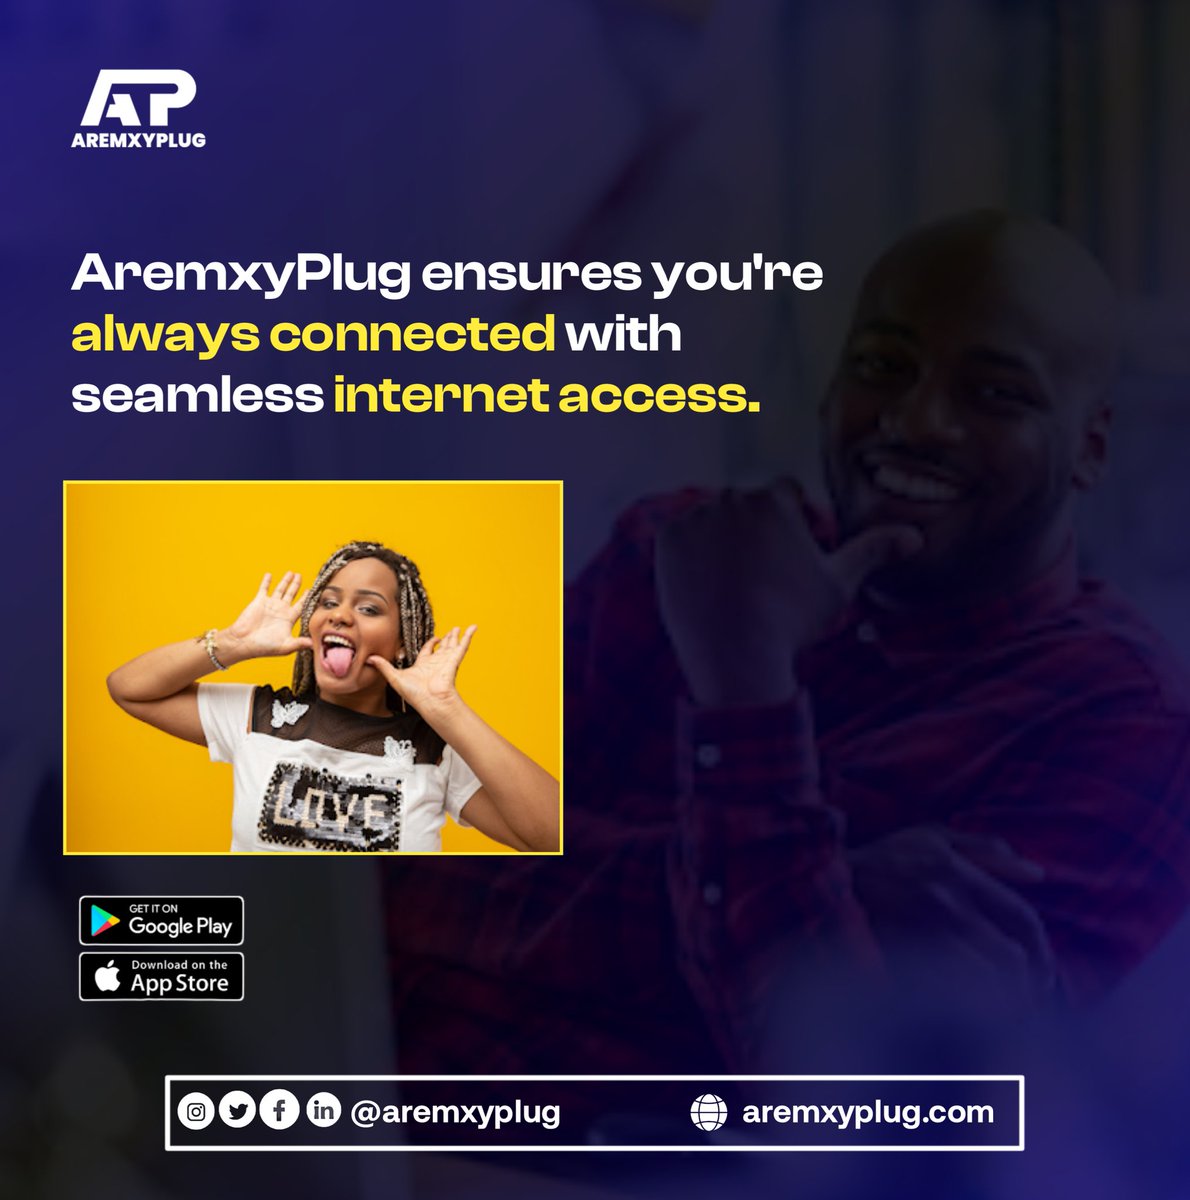 Fast, reliable data bundles are just a few taps away! 📶💻 . Browse, stream, and stay productive without interruptions!

#DataBundles #SeamlessConnectivity
#AremxyPlug